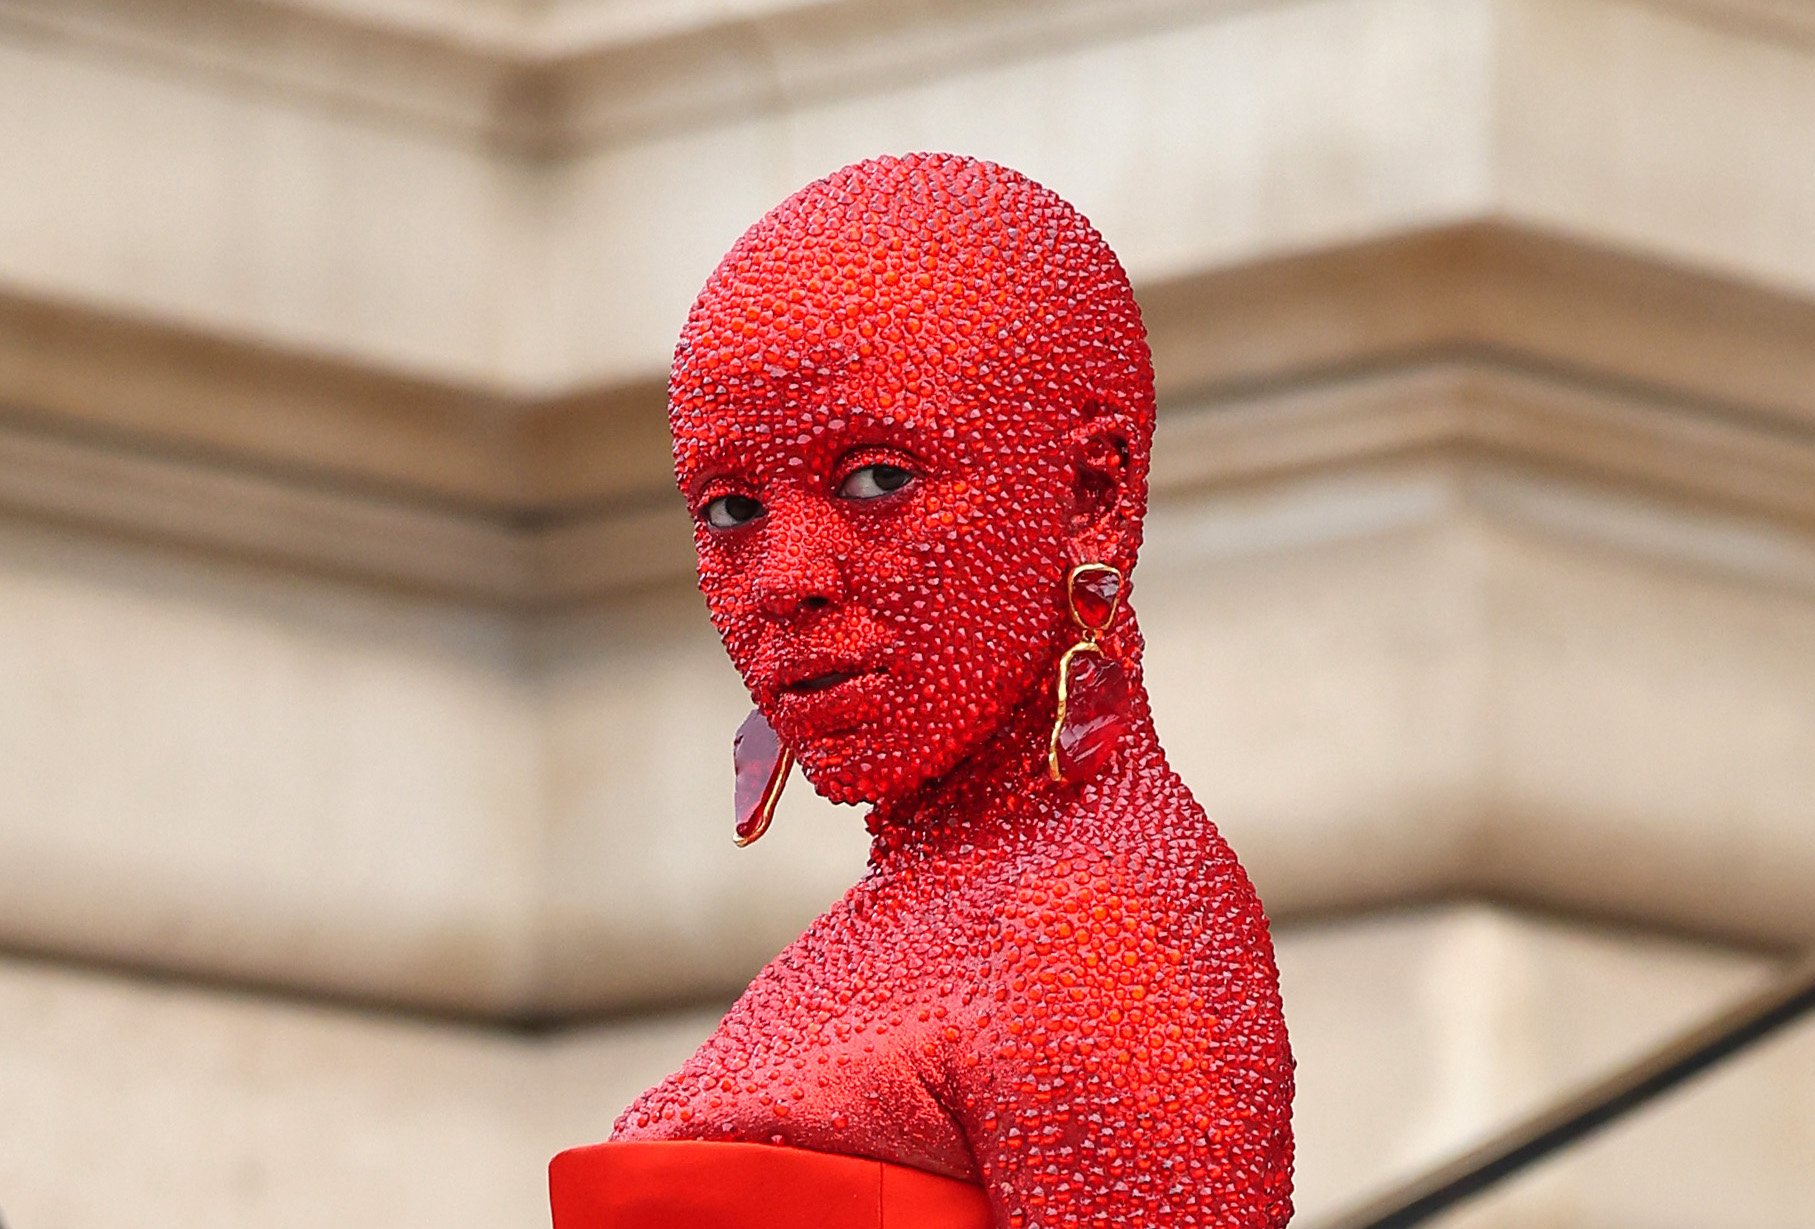 Doja Cat in a head-to-toe crystallized look at Paris Fashion Week